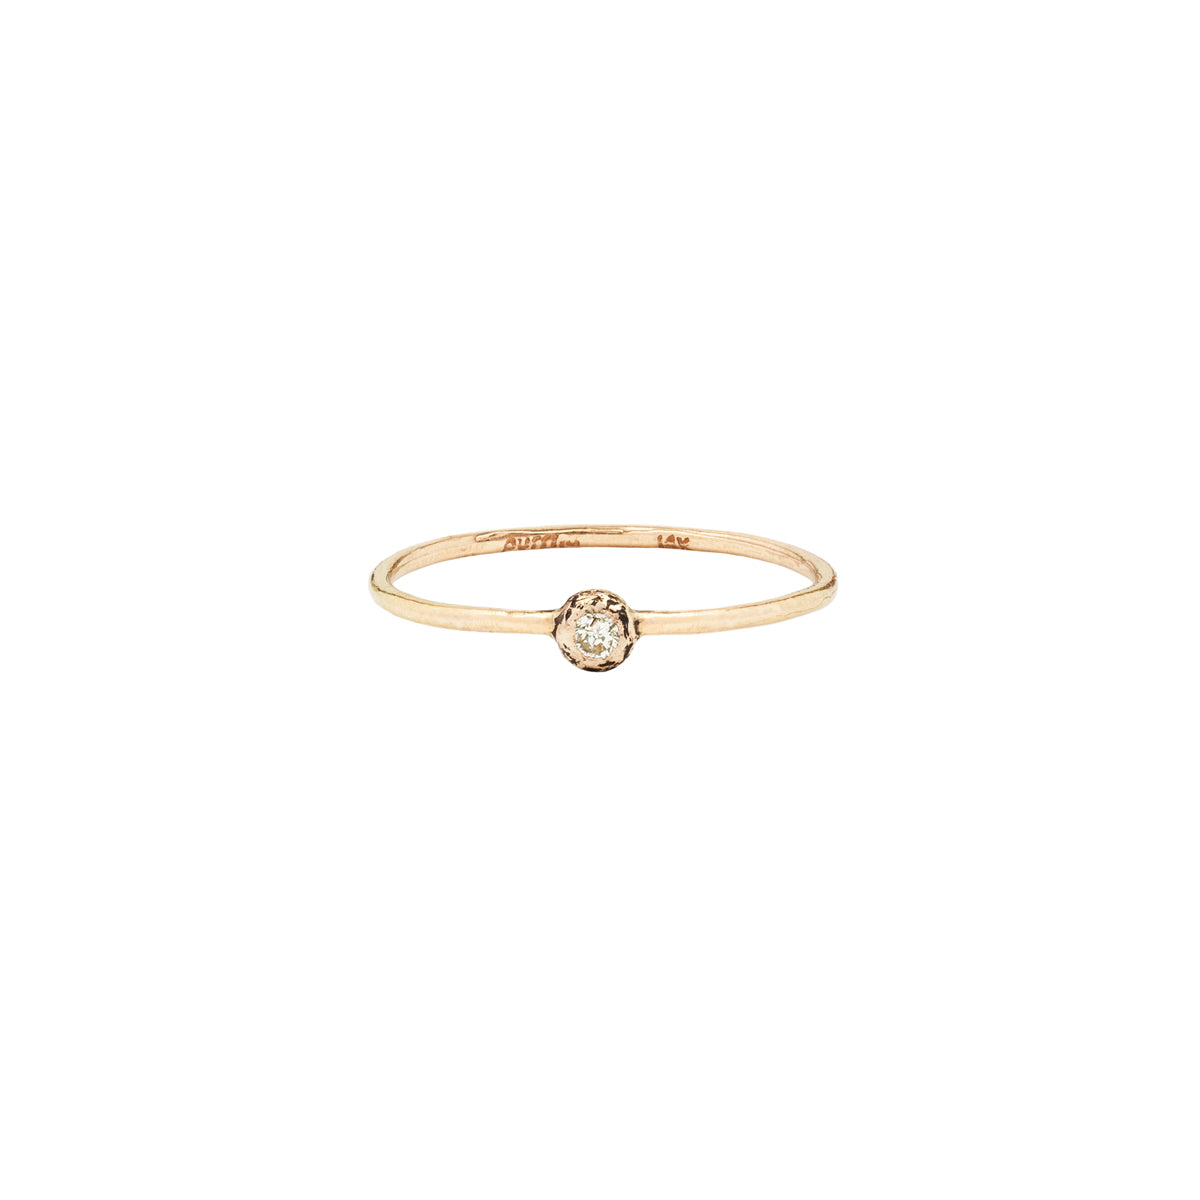 A 14k gold ring featuring a gold set white diamond.